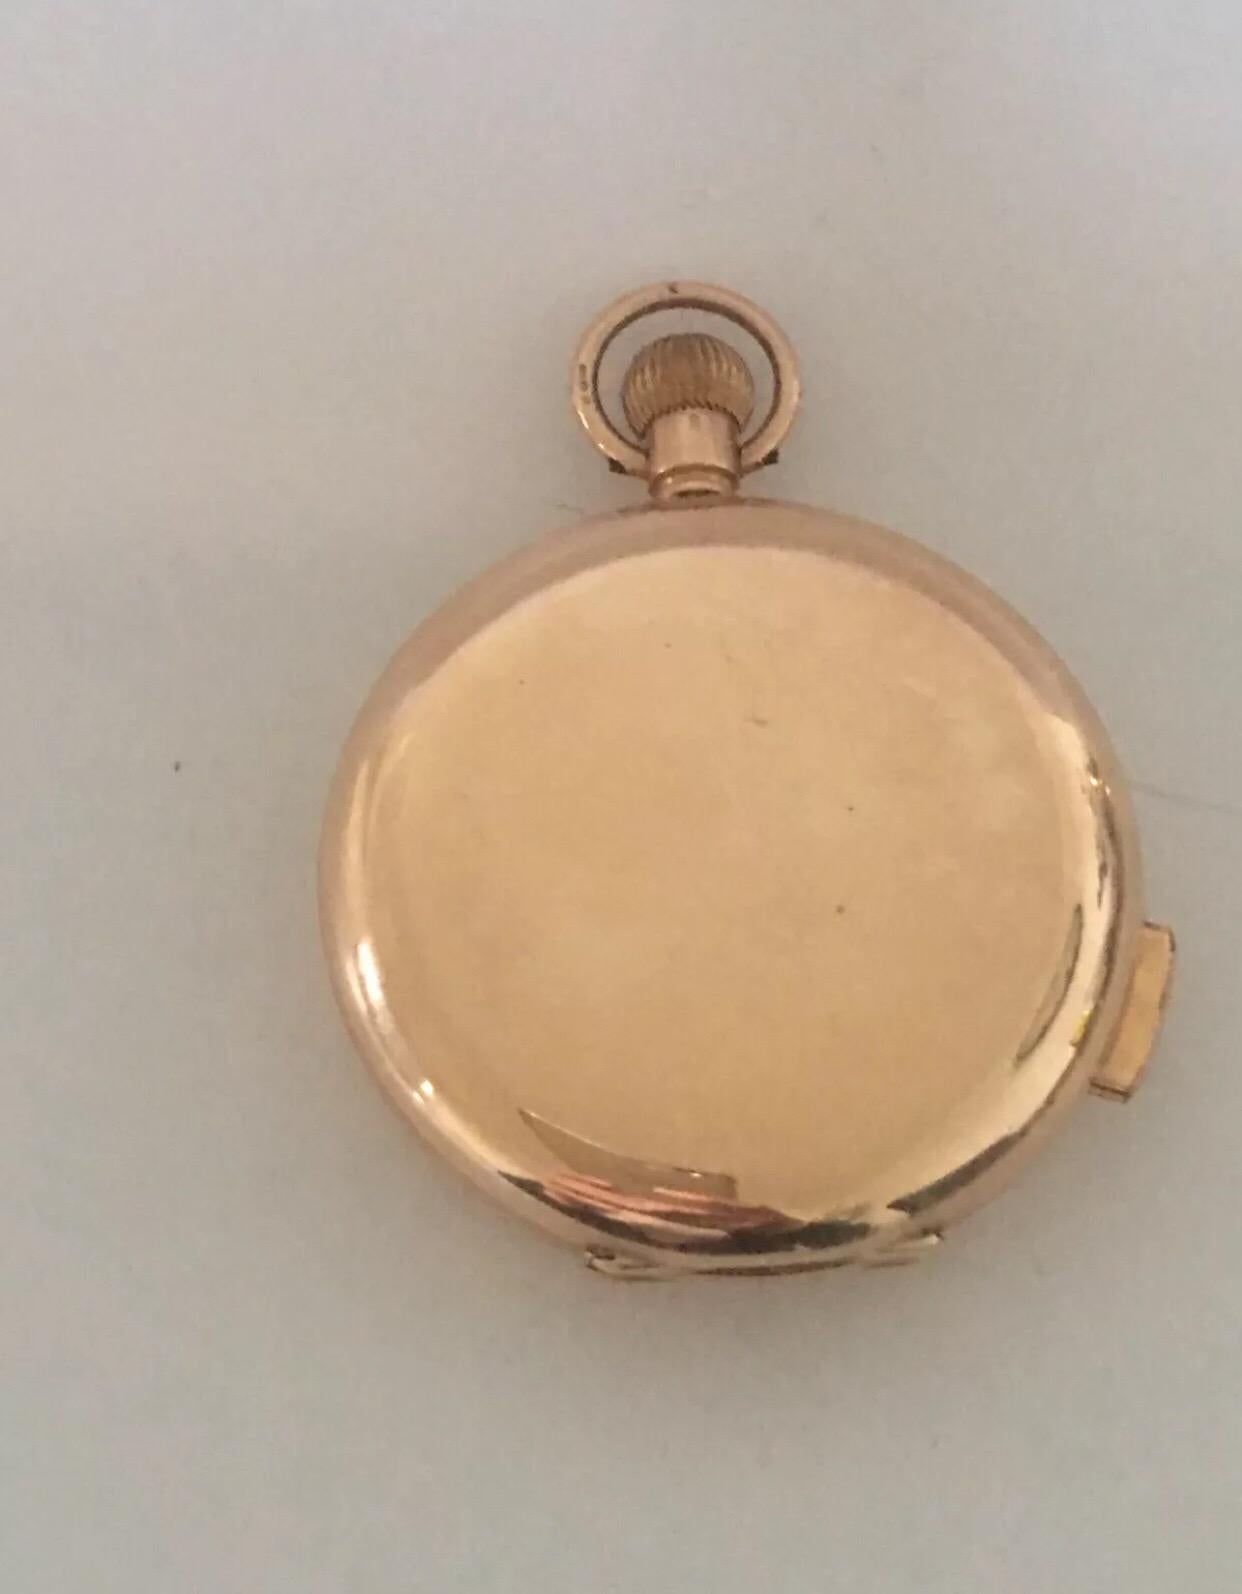 9K Gold Full Hunter Quarter Repeater Pocket Watch signed “ The Vigilant Watch “c.1900’s


This fine quality repeater gold pocket watch is in good working condition and is ticking well. Repeating mechanism has a good sound and it strikes on demand.